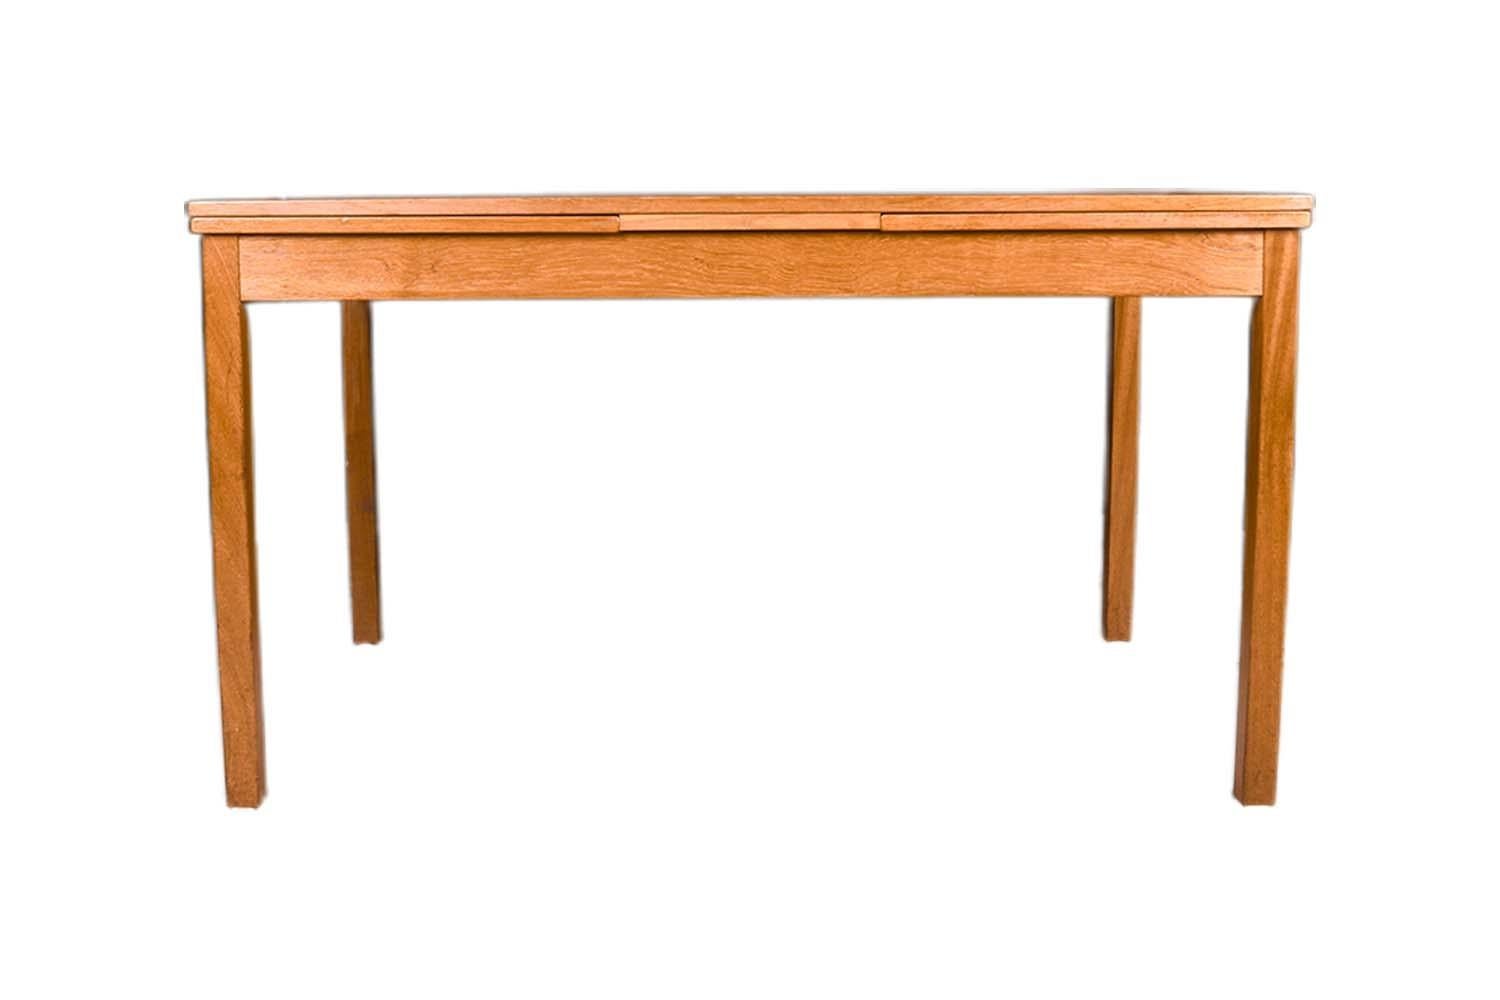 Beautiful, Mid Century Danish Modern draw leaf extendable teak dining table, made in Denmark circa 1960's. With an initial small footprint, this table can also offer a generous space and double in size once its draw leaves are extended. Amazing